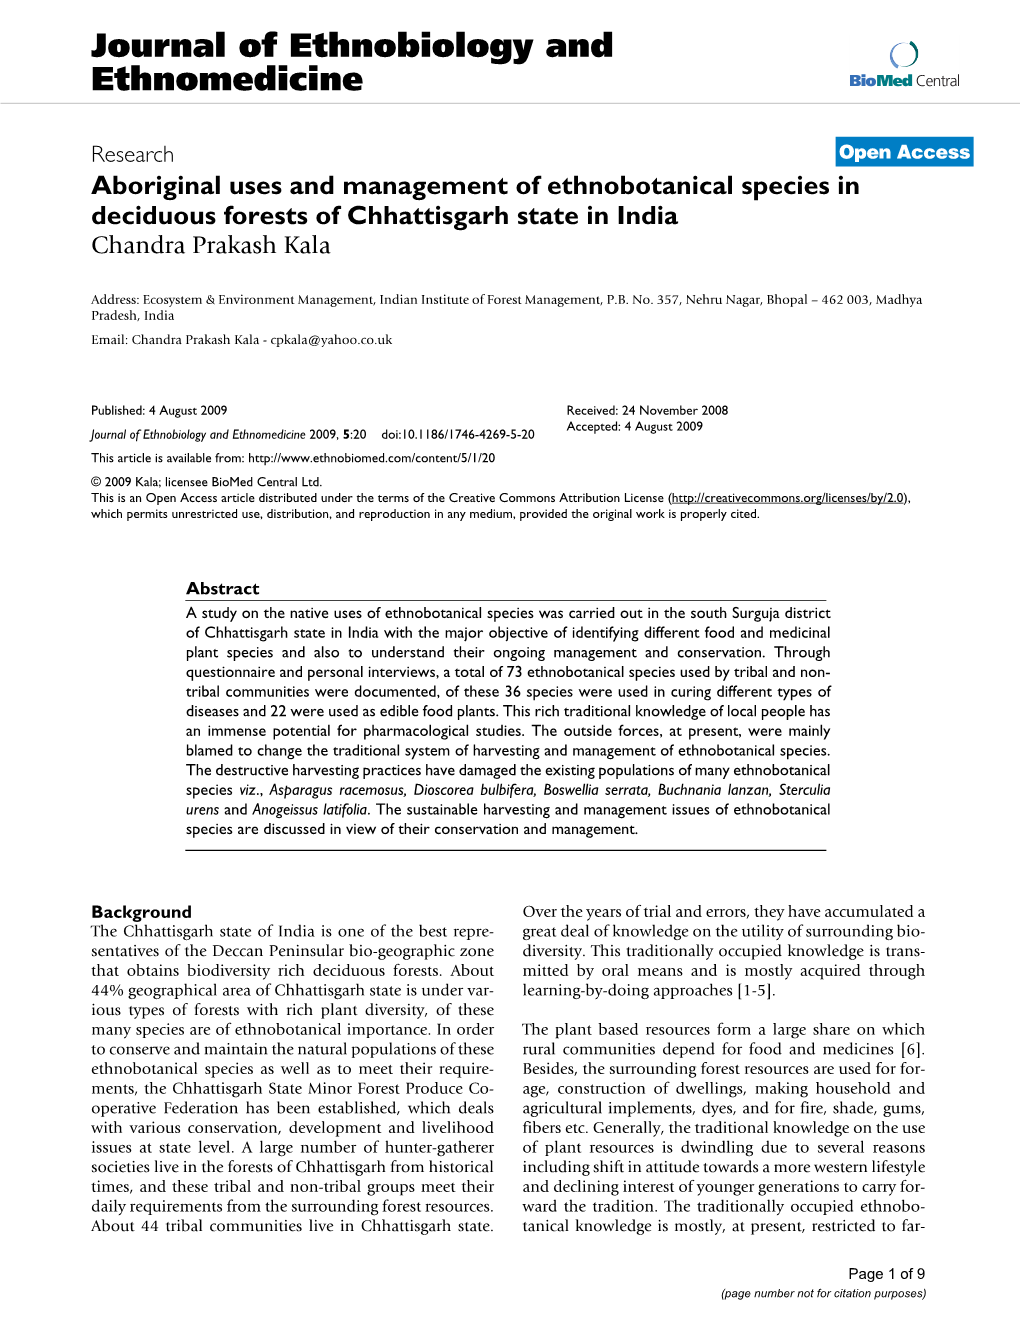 Aboriginal Uses and Management of Ethnobotanical Species in Deciduous Forests of Chhattisgarh State in India Chandra Prakash Kala